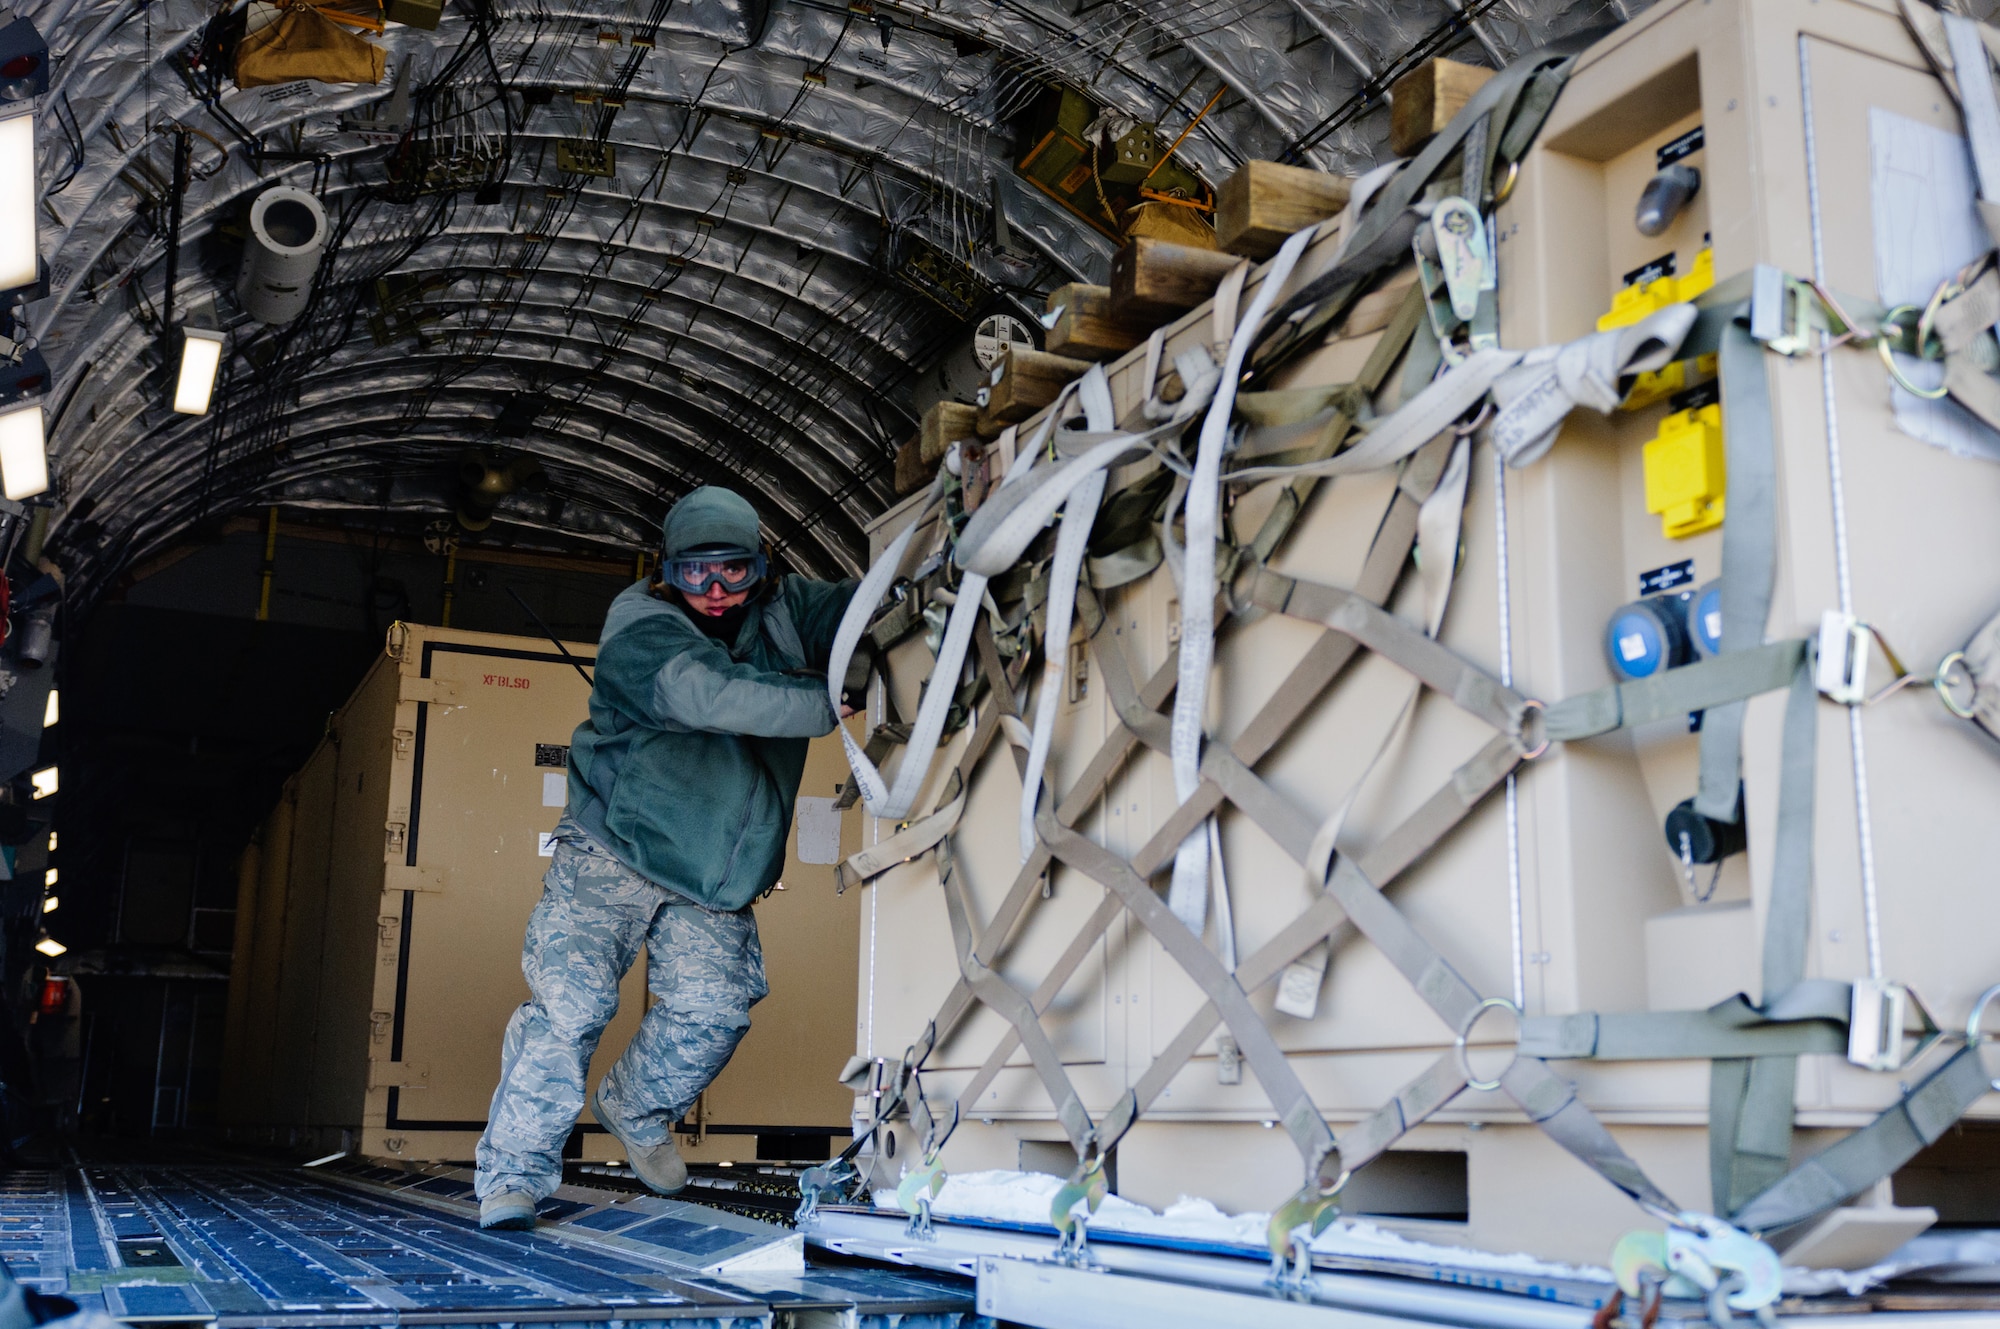 Staff Sgt. Brian Leach, aerial port ramp supervisor for the Kentucky Air National Guard's 123rd Contingency Response Group, pushes a pallet of cargo from a C-17 during Exercise Eagle Flag at Joint Base McGuire-Dix-Lakehurst, N.J., on March 28, 2012. The unit, from Louisville, Ky., joined forces with the U.S. Army's 690th Rapid Port Opening Element from Fort Eustis, Va., to establish a Joint Task Force-Port Opening through March 30. (U.S. Air Force photo by Master Sgt. Phil Speck)